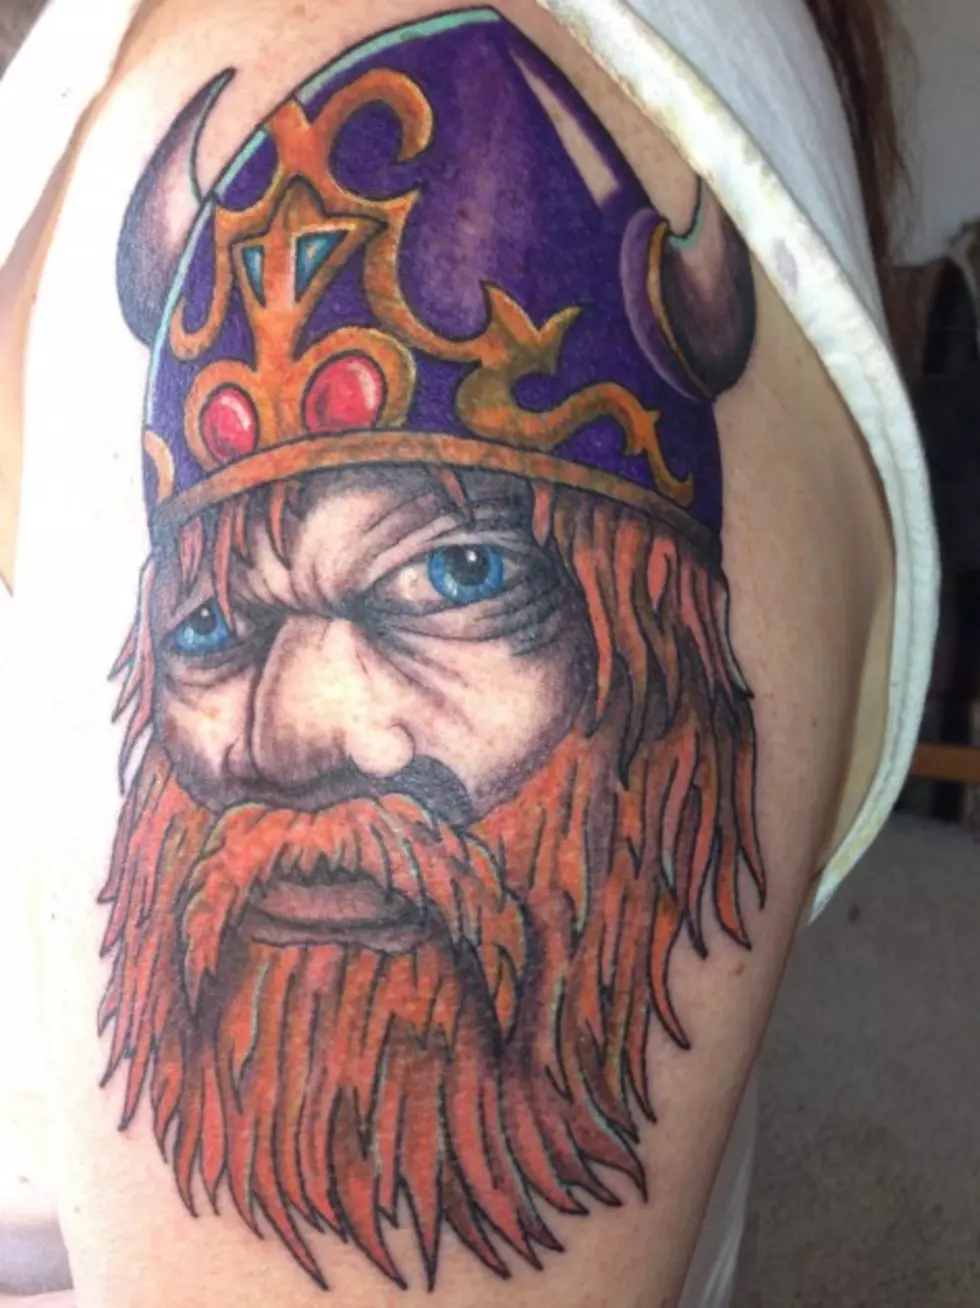 My Amazing Tattoo Cover Up &#8211; See What This Viking Turned Into &#8211; Brian&#8217;s Blog [PICTURES]